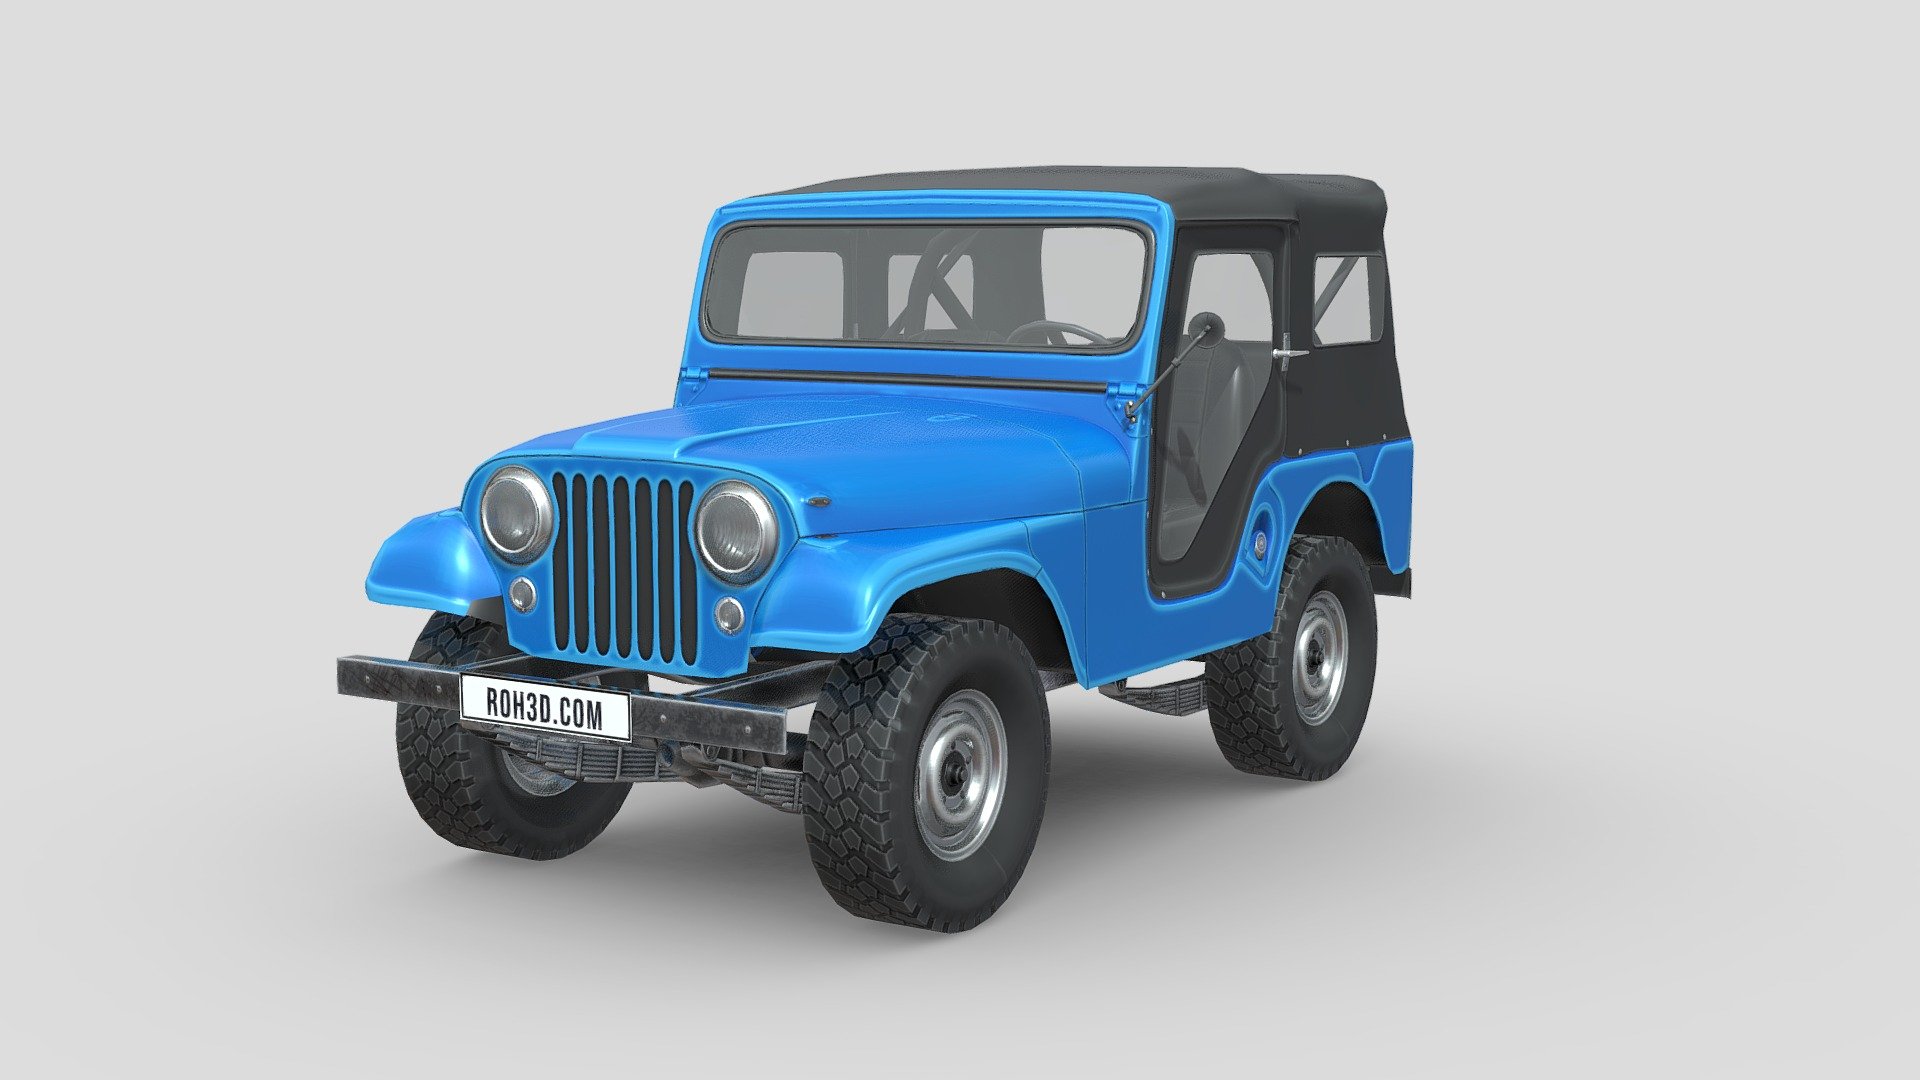 The Jeep CJ models are both a series and a range of small, open-bodied off-road vehicles and compact pickup trucks, built and sold by several successive incarnations of the Jeep automobile marque from 1945 to 1986. The 1945 Willys Jeep was the world's first mass-produced civilian four-wheel drive car.

In 1944, Willys-Overland, one of the two main manufacturers of the World War II military Jeep, built the first prototypes for a commercial version – the CJ, short for &ldquo;civilian Jeep